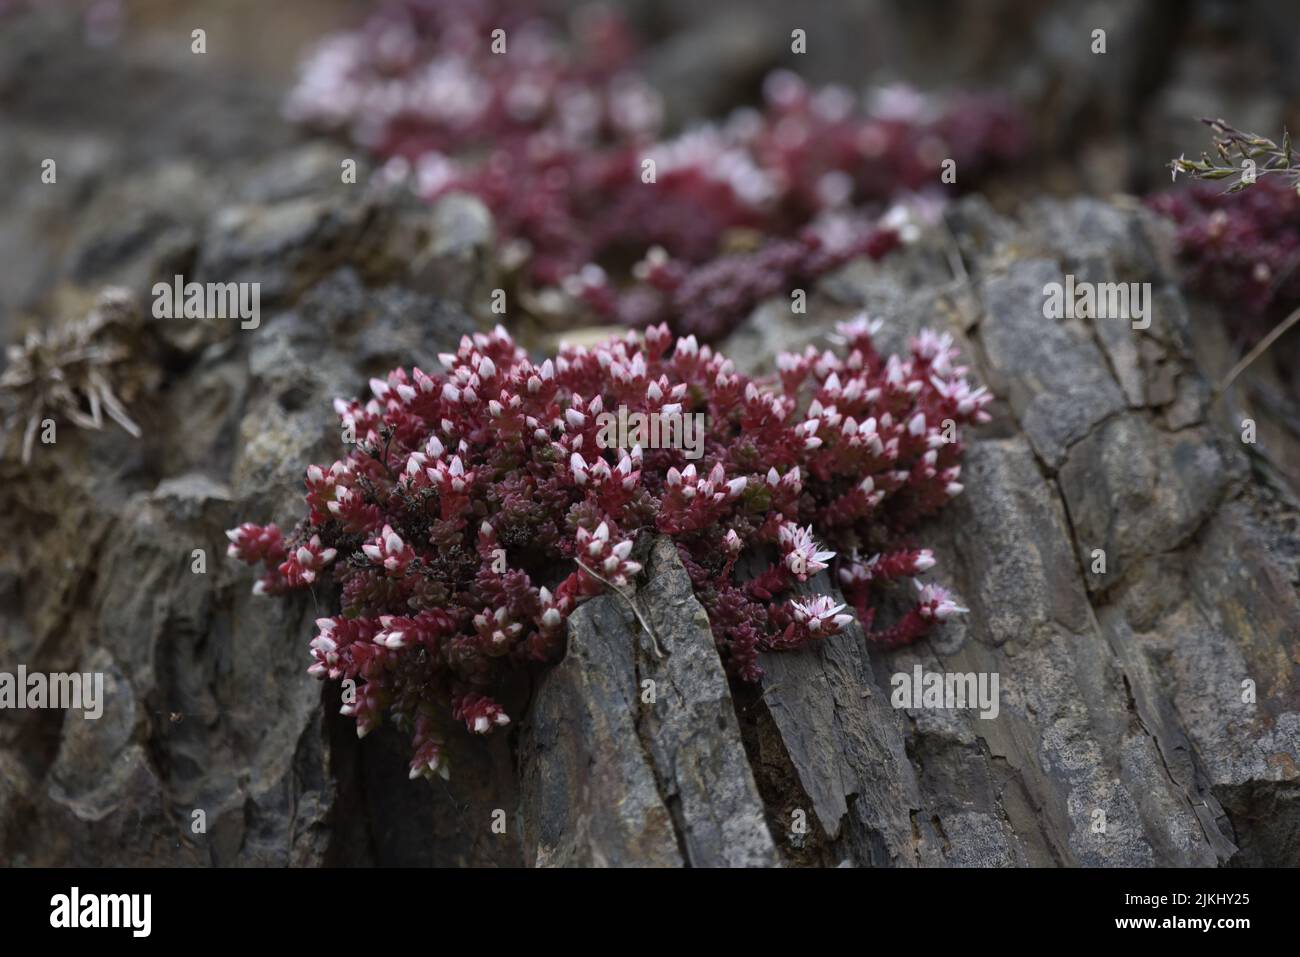 Clusters of Pink Flowering English Stonecrop (Sedum anglicum) Growing on Coastal Rocks in Foreground and Background of Image, on the Isle of Man, UK Stock Photo